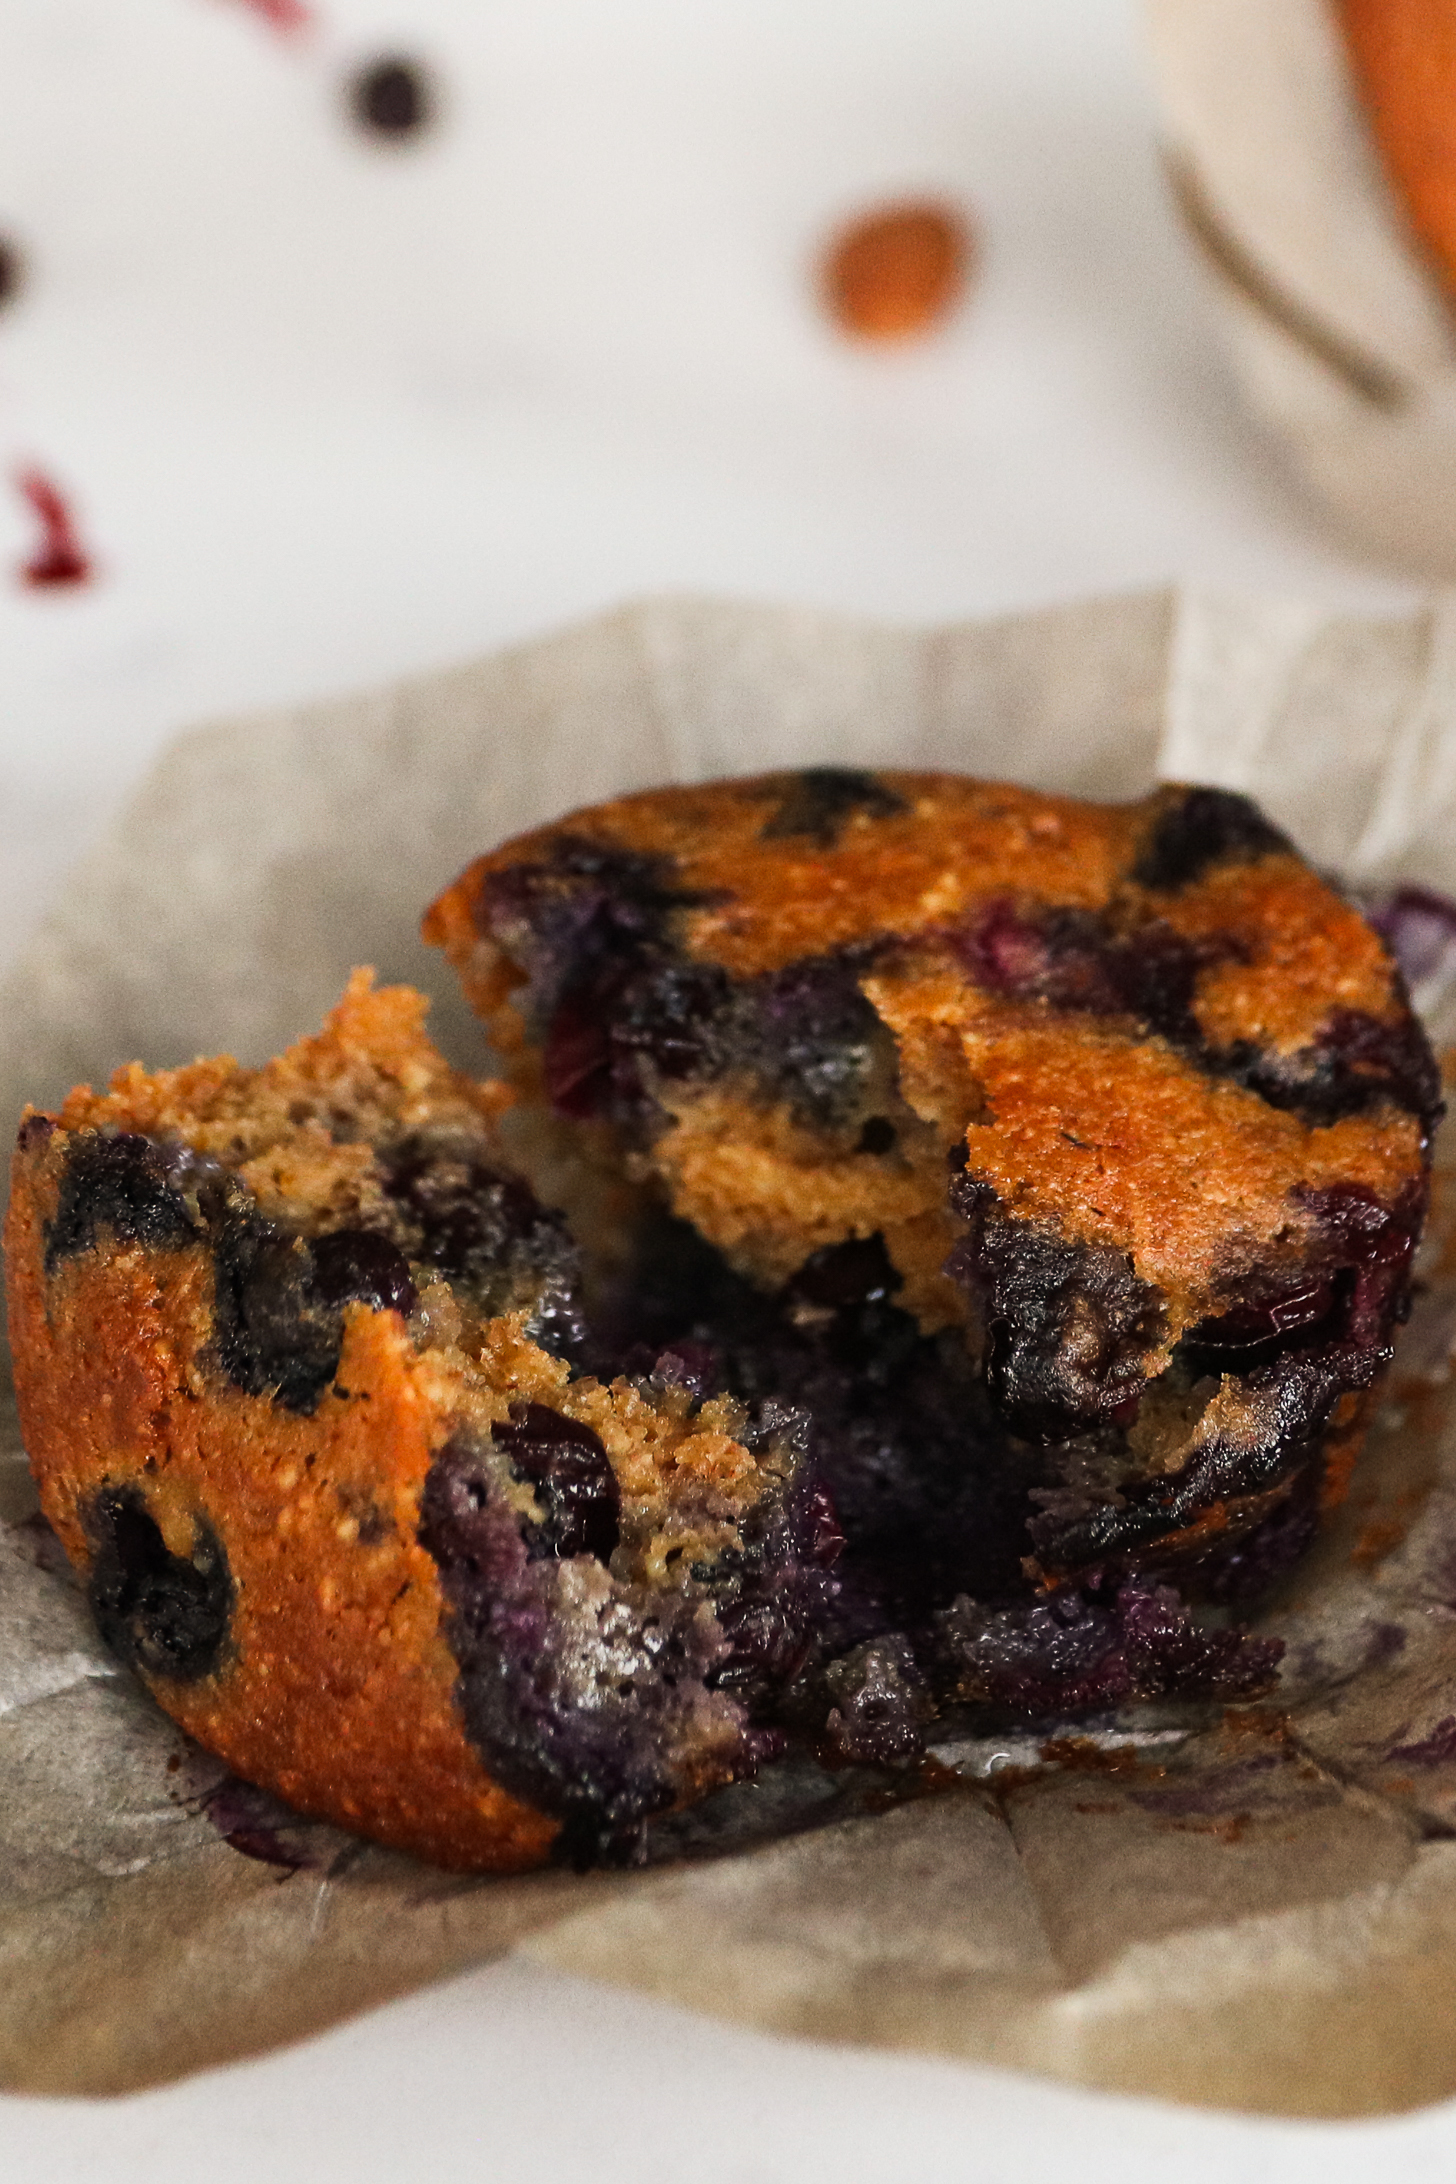 Close-up image of a blueberry muffin torn in half.